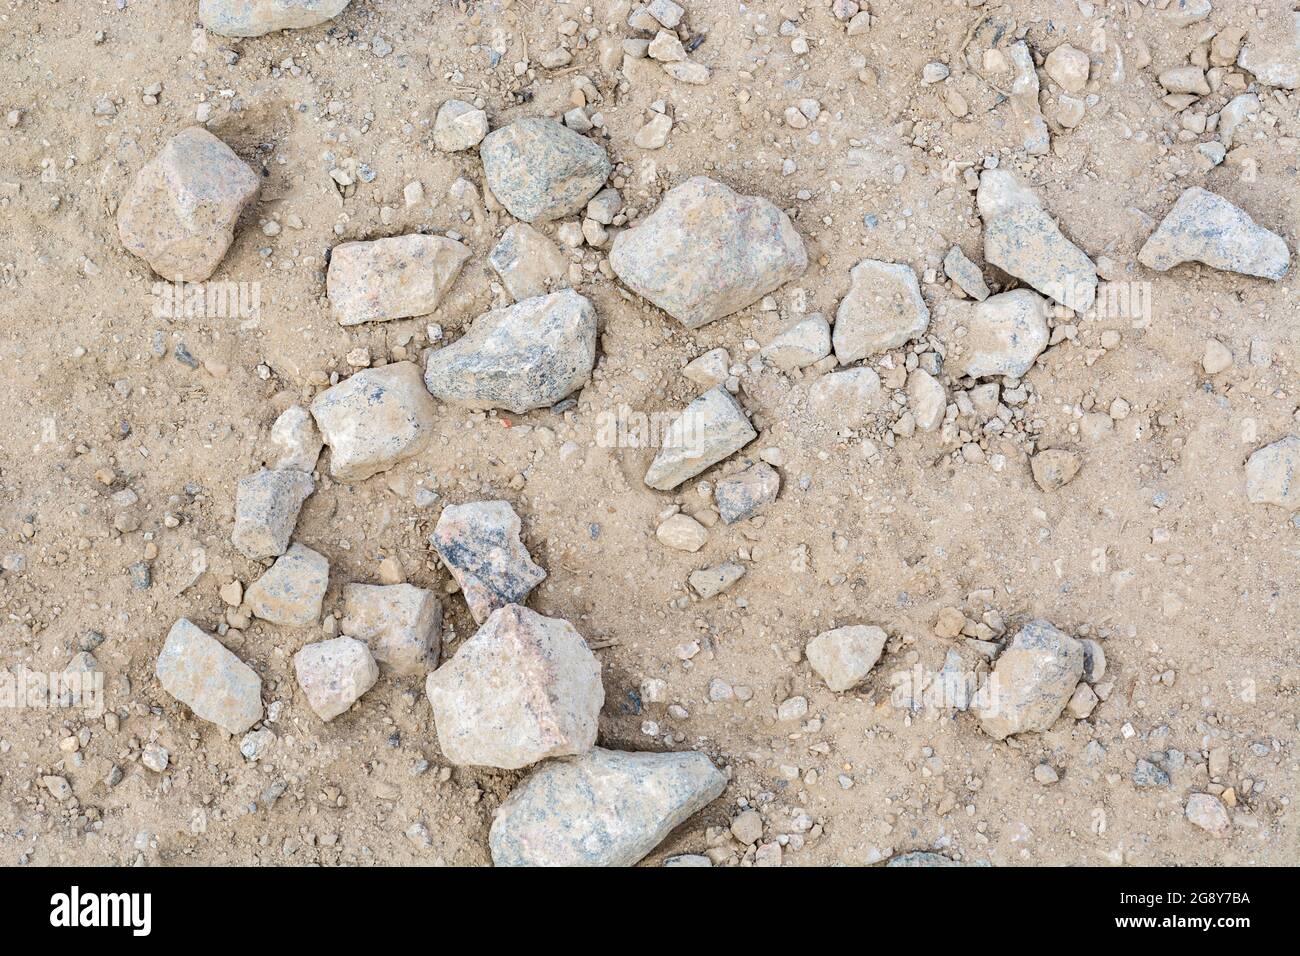 Random pieces of rough hardcore stone laid down on a heavy duty construction building site. Largest pieces about 2-3 inches wide. For rough road ahead Stock Photo